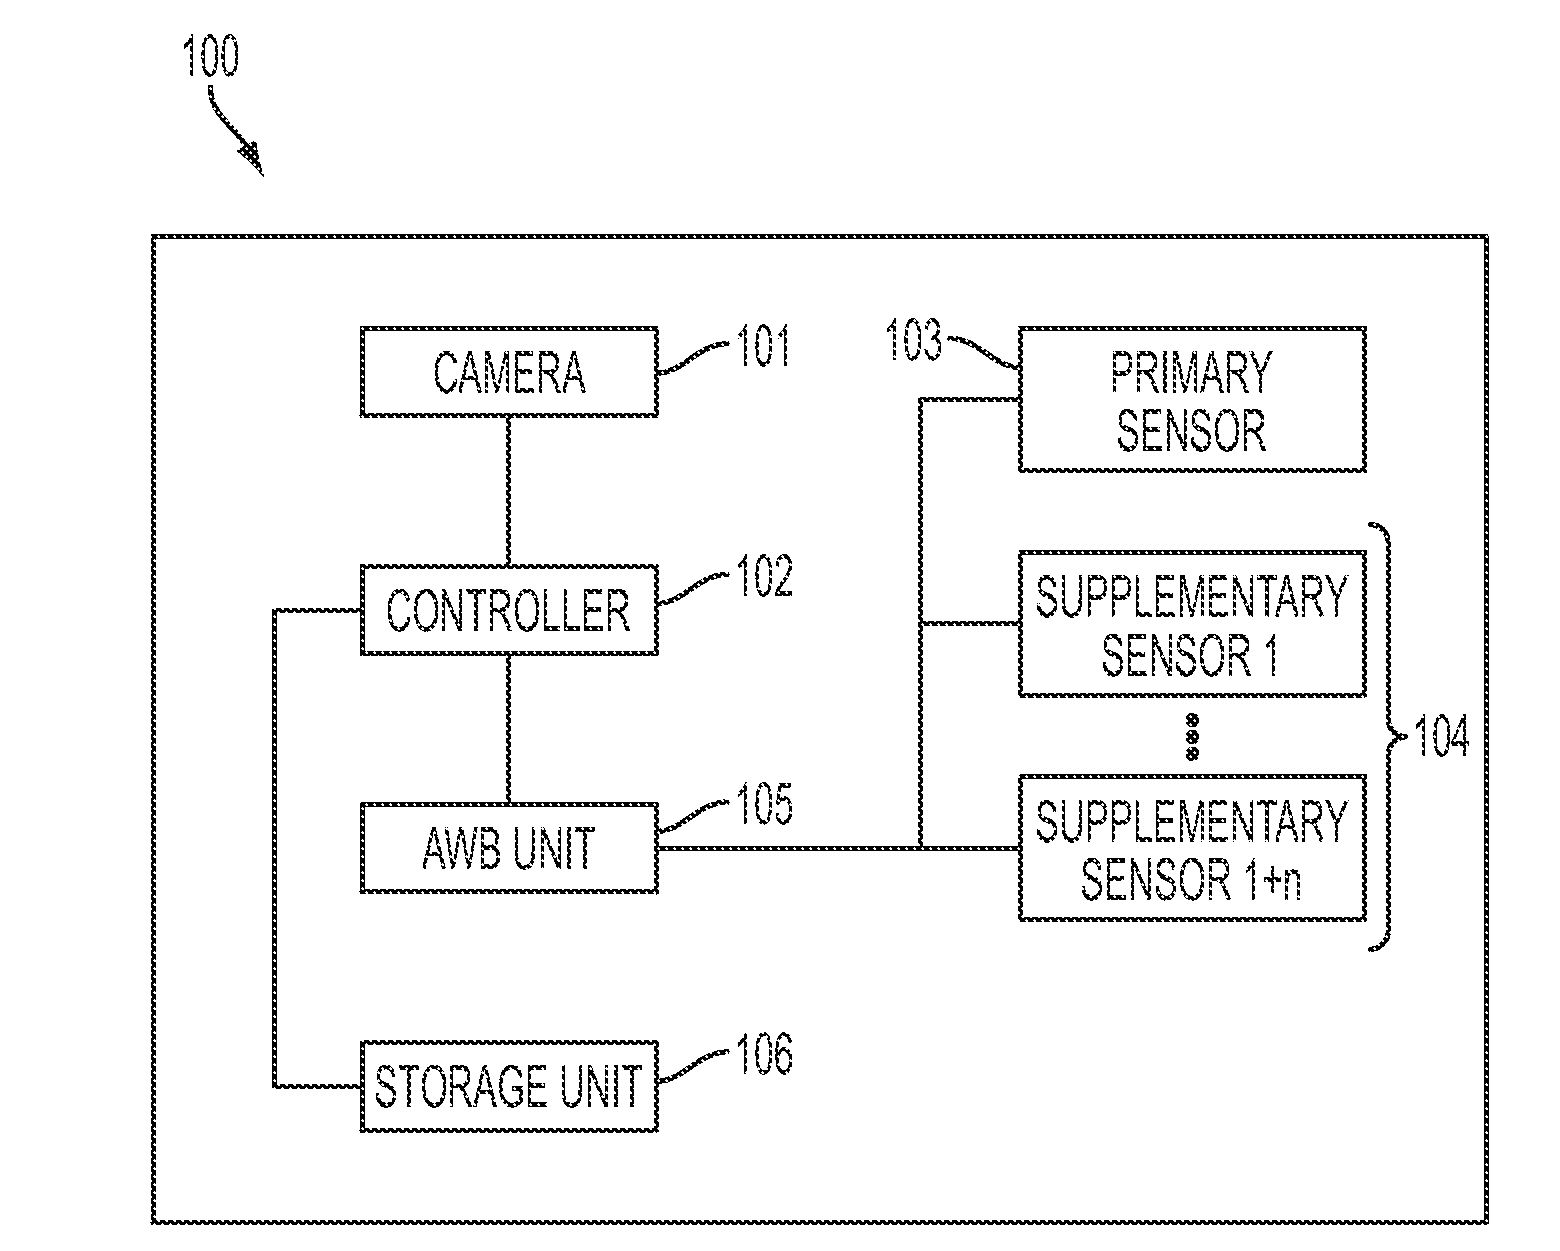 Apparatus and method for automatic white balance with supplementary sensors